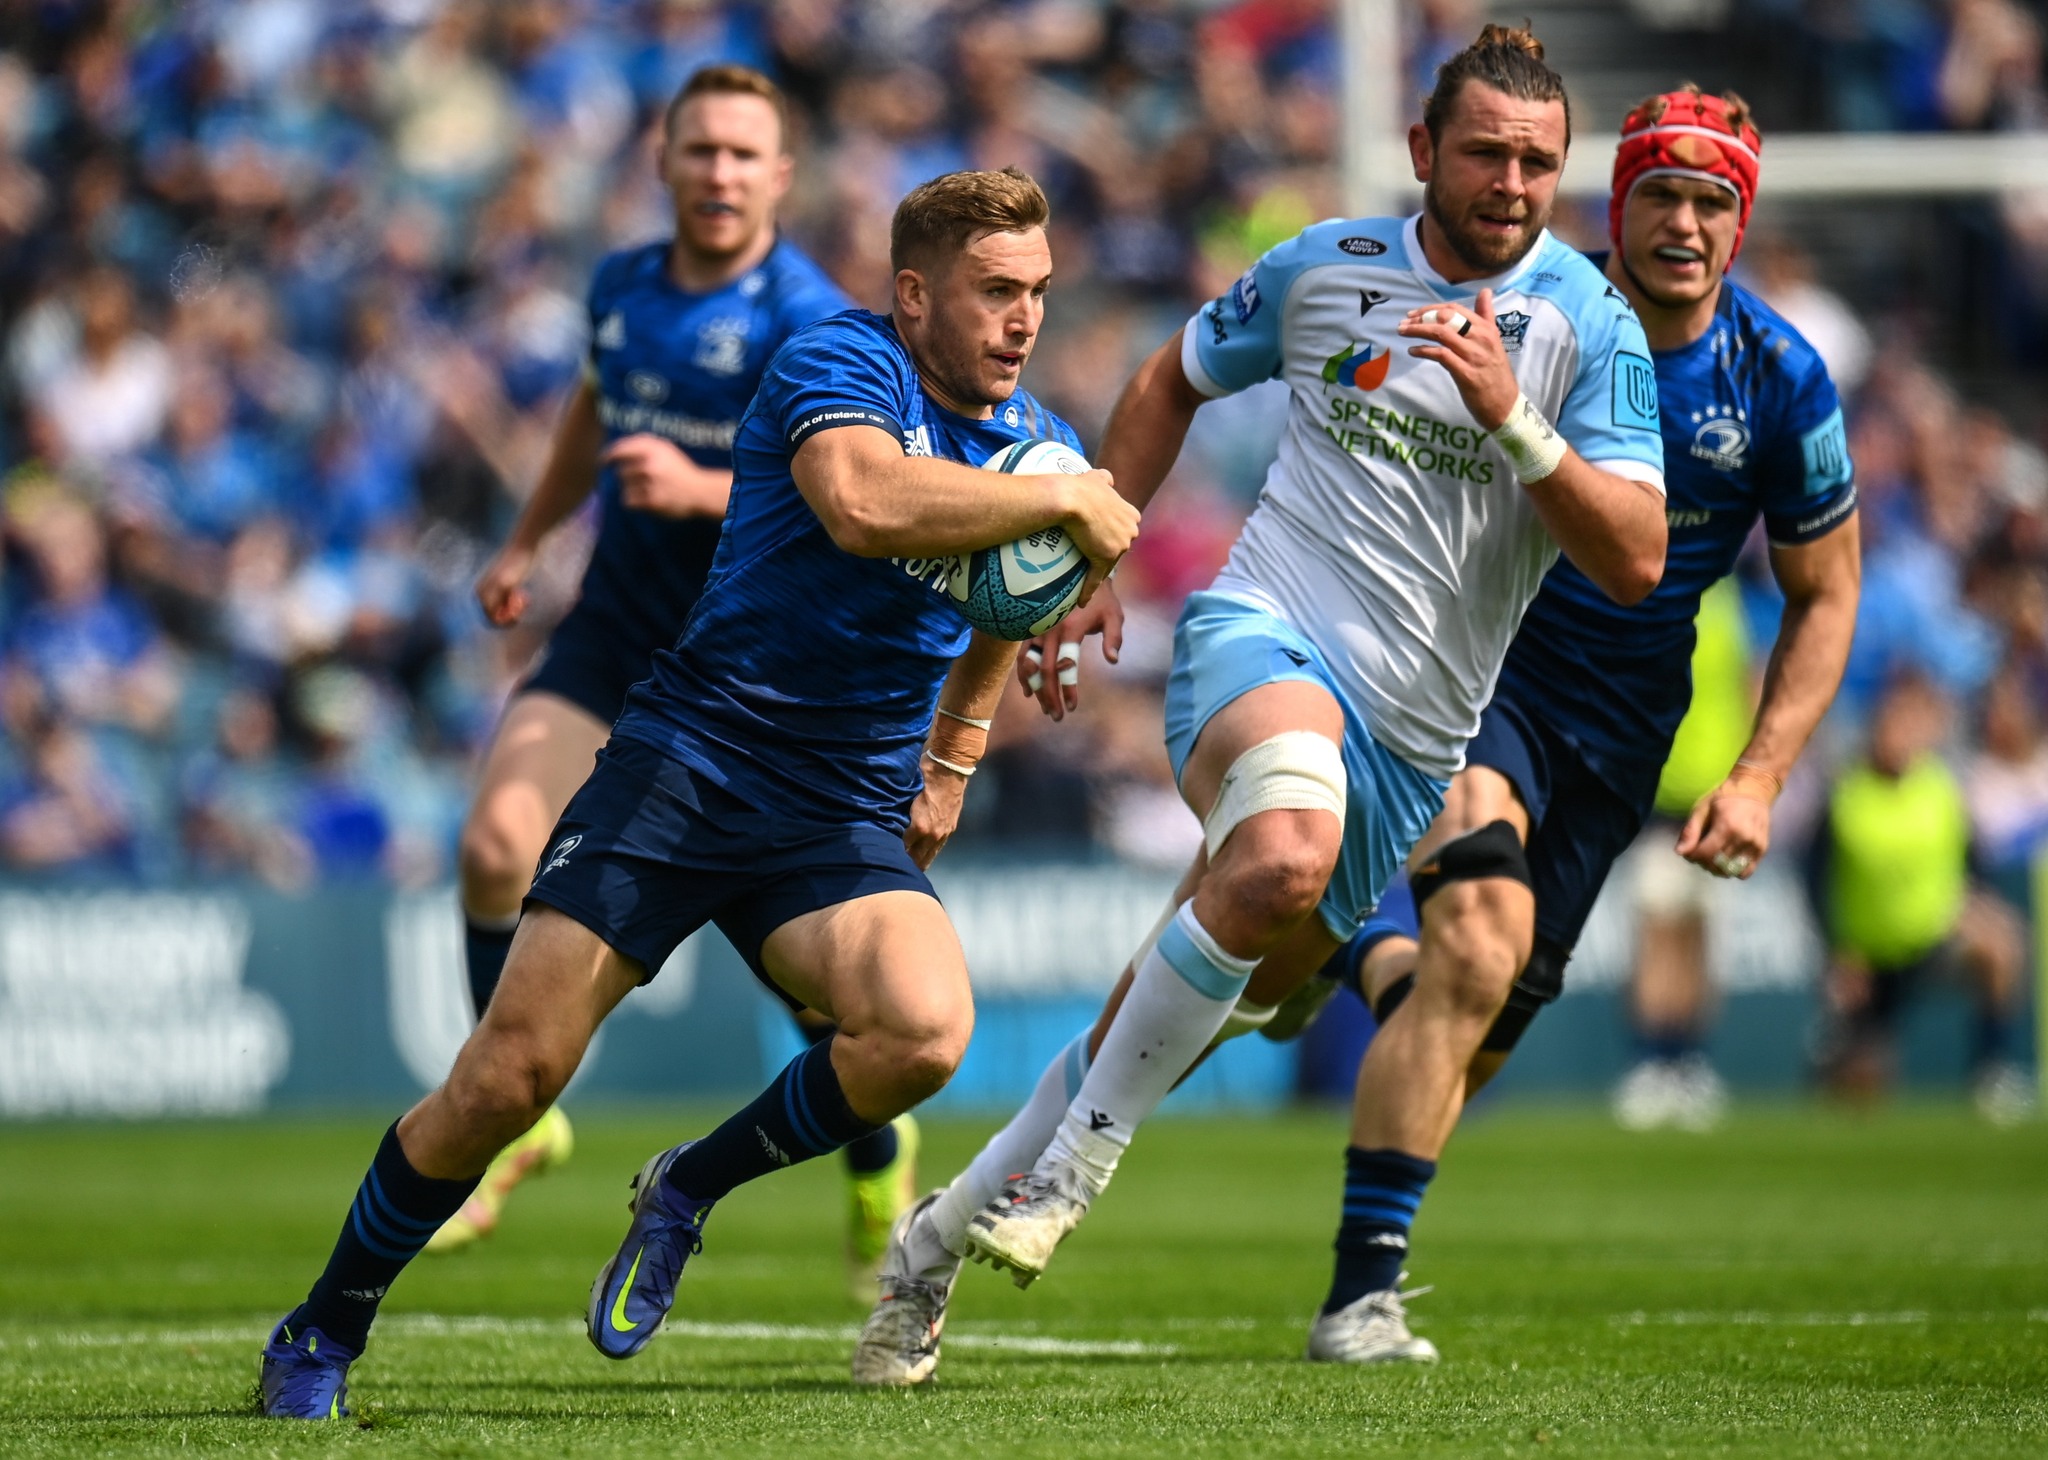 (Ph. Leinster Rugby)